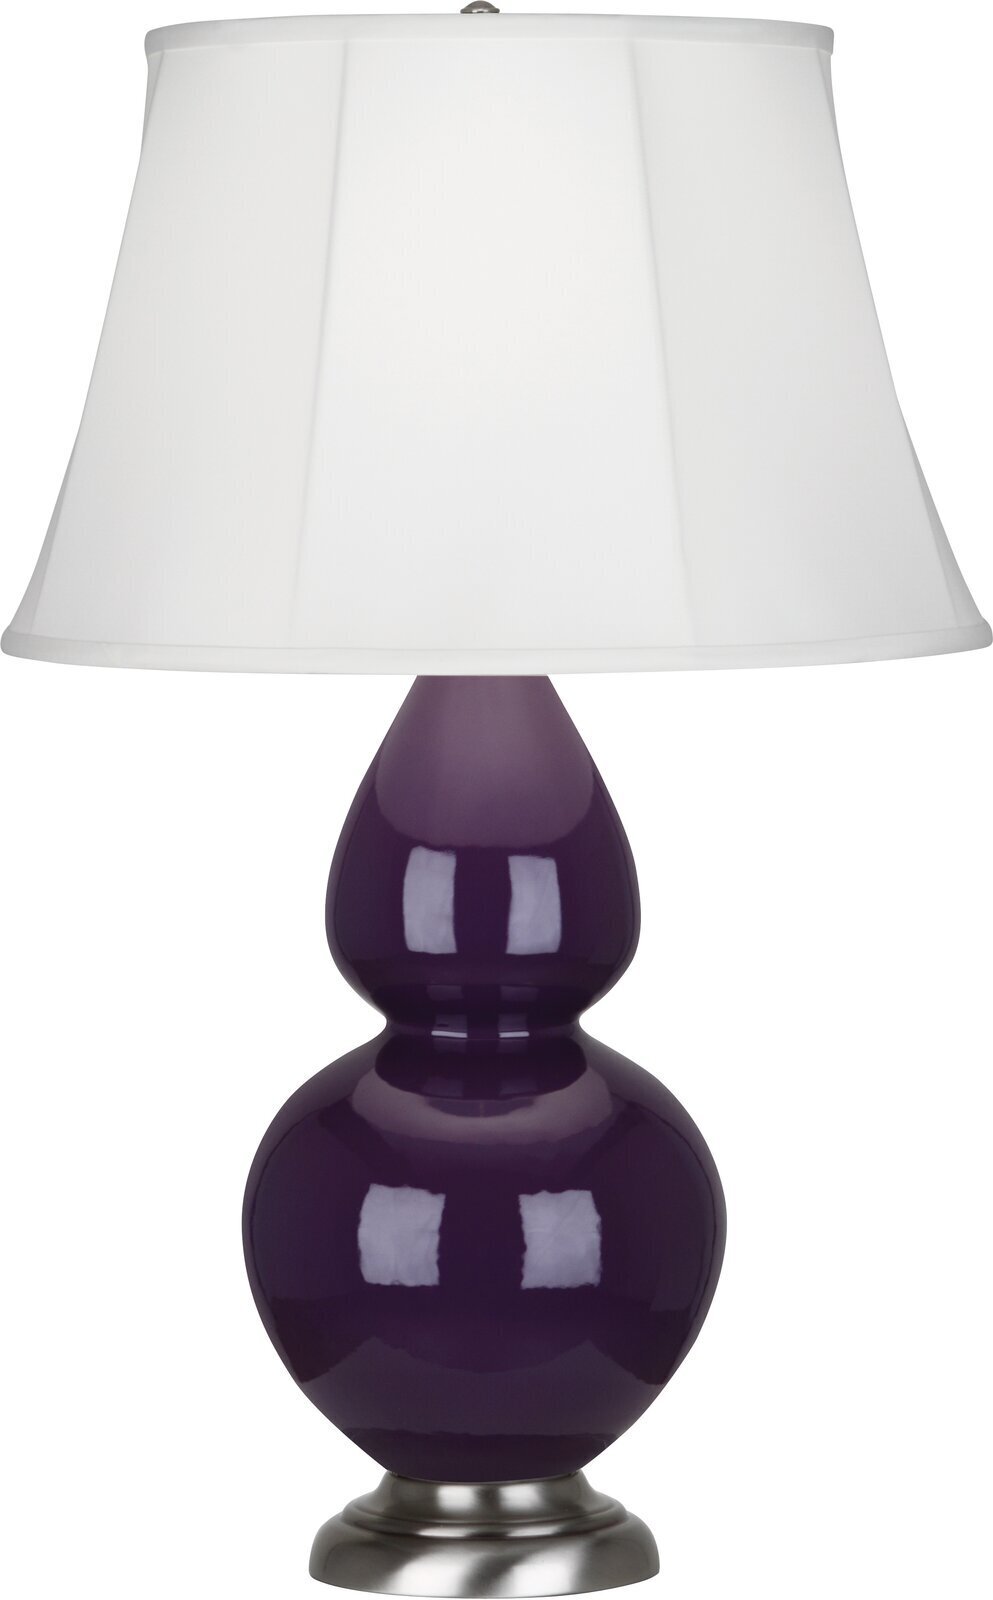 Purple Lamp with Dimmer Switch